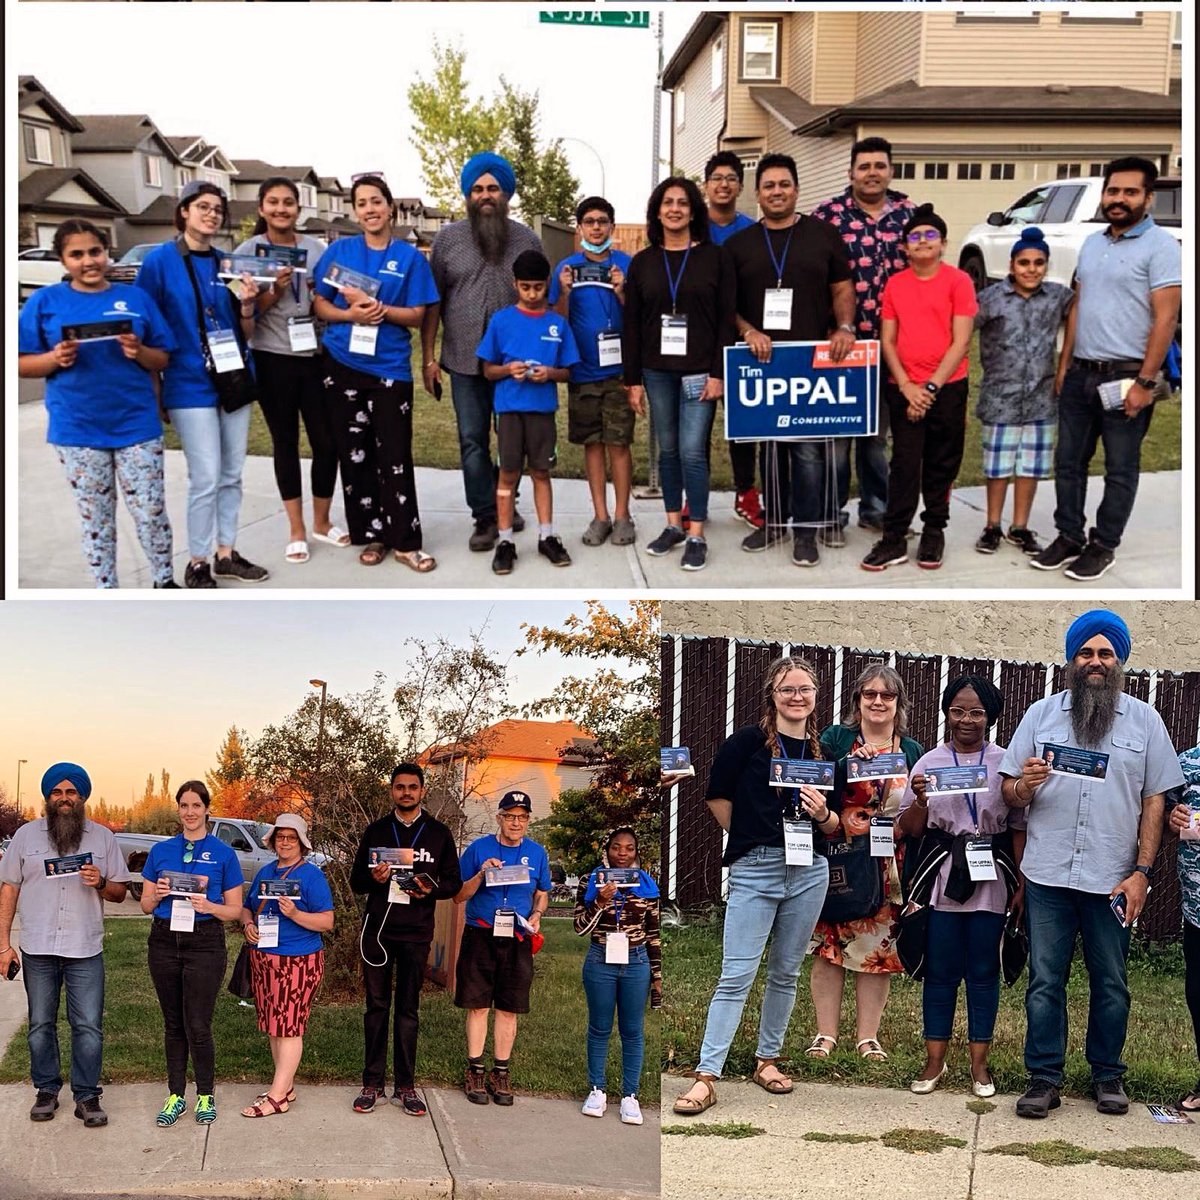 Looking forward to knocking on doors in Mill Woods on Saturday, April 6th from 12-2:30PM. I would love to see you out with us! Email volunteerfortimuppal@gmail.com for more information. #millwoods #edmonton #yeg